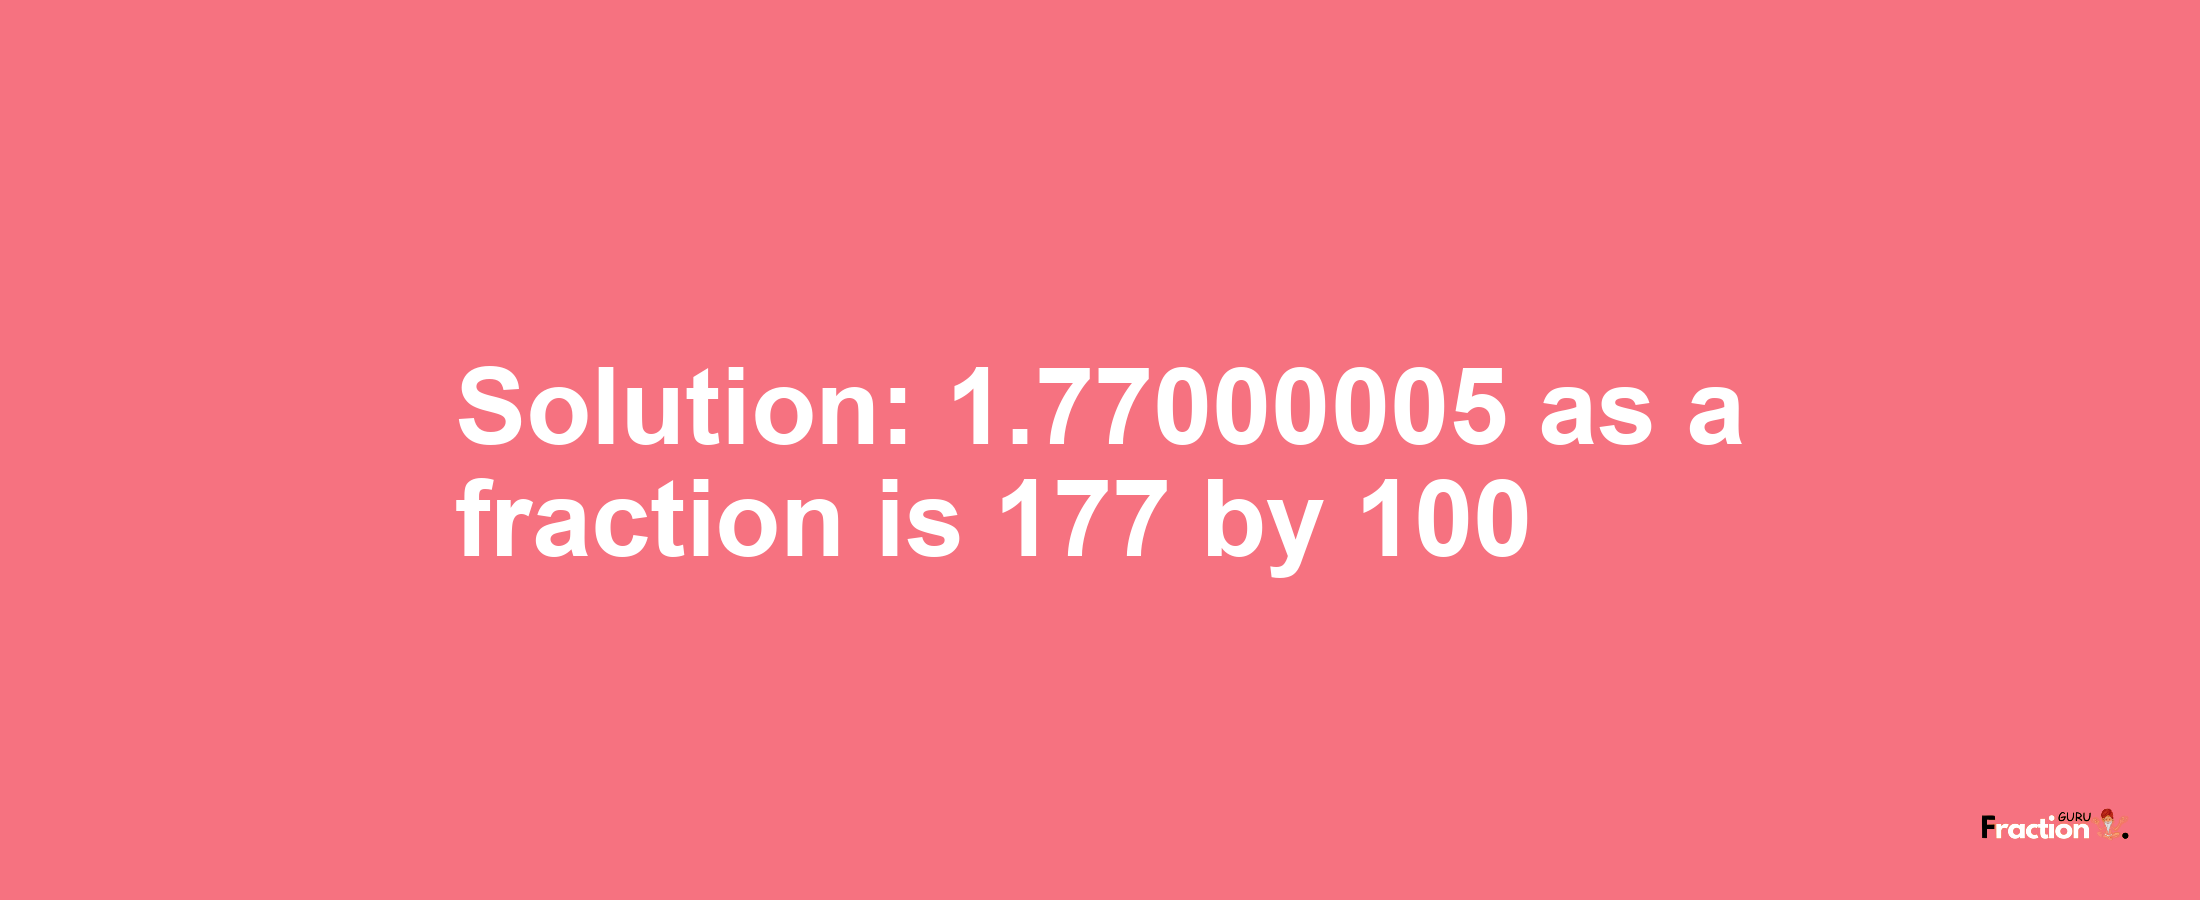 Solution:1.77000005 as a fraction is 177/100